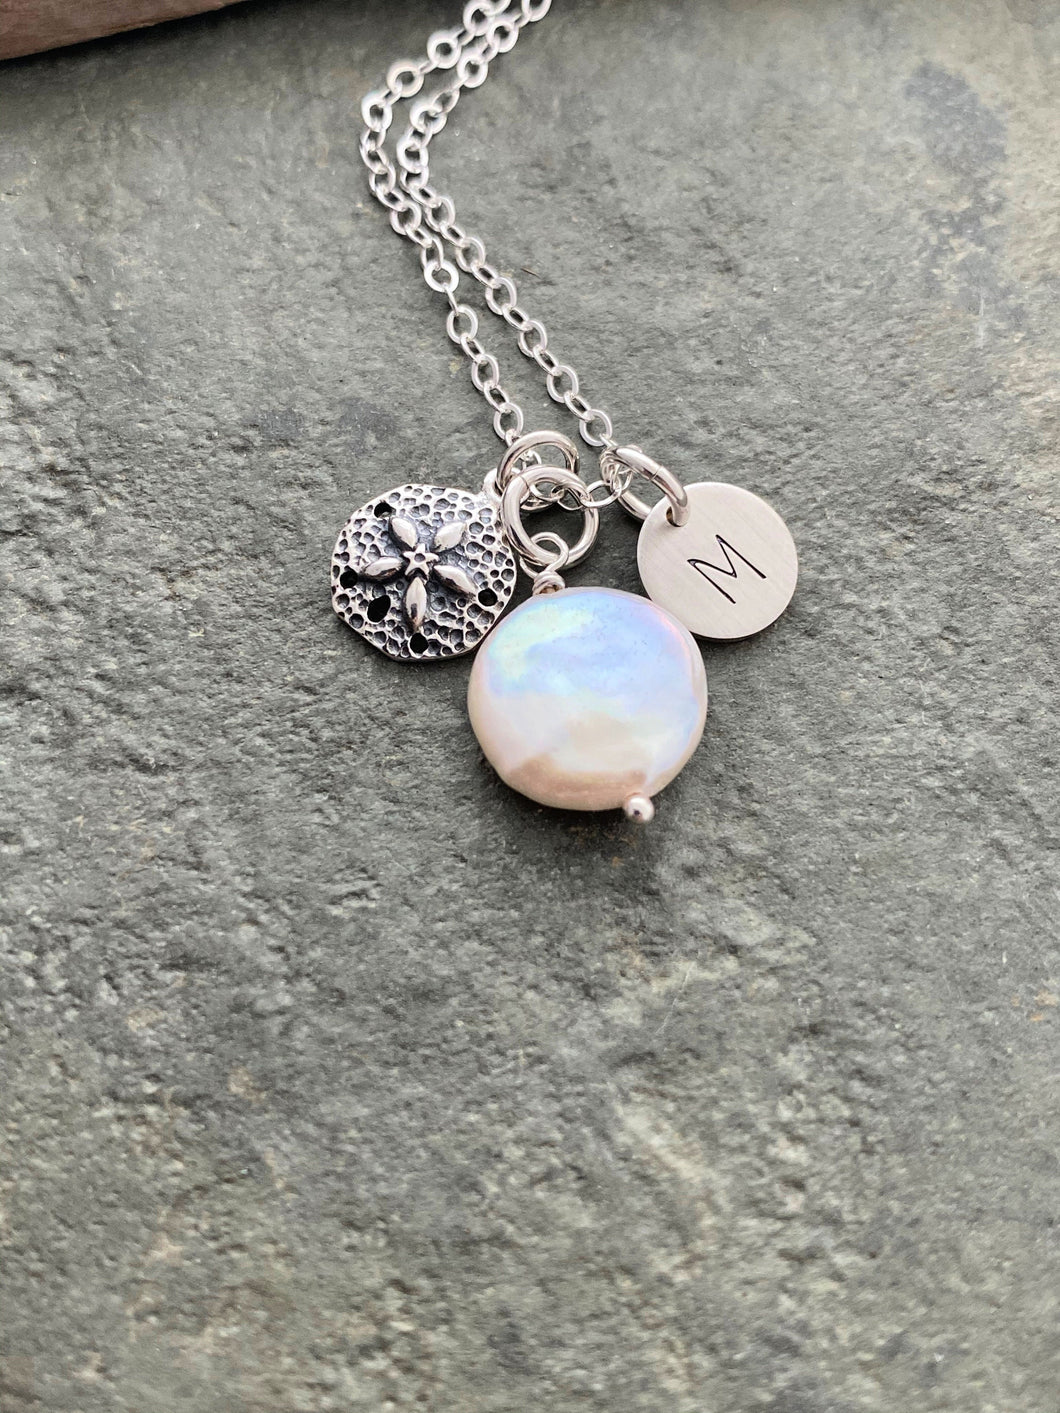 Personalized Charm Necklace with Sterling Silver Sand Dollar White Coin Pearl and Initial Charm Made to Order Wedding Bridesmaid Gift